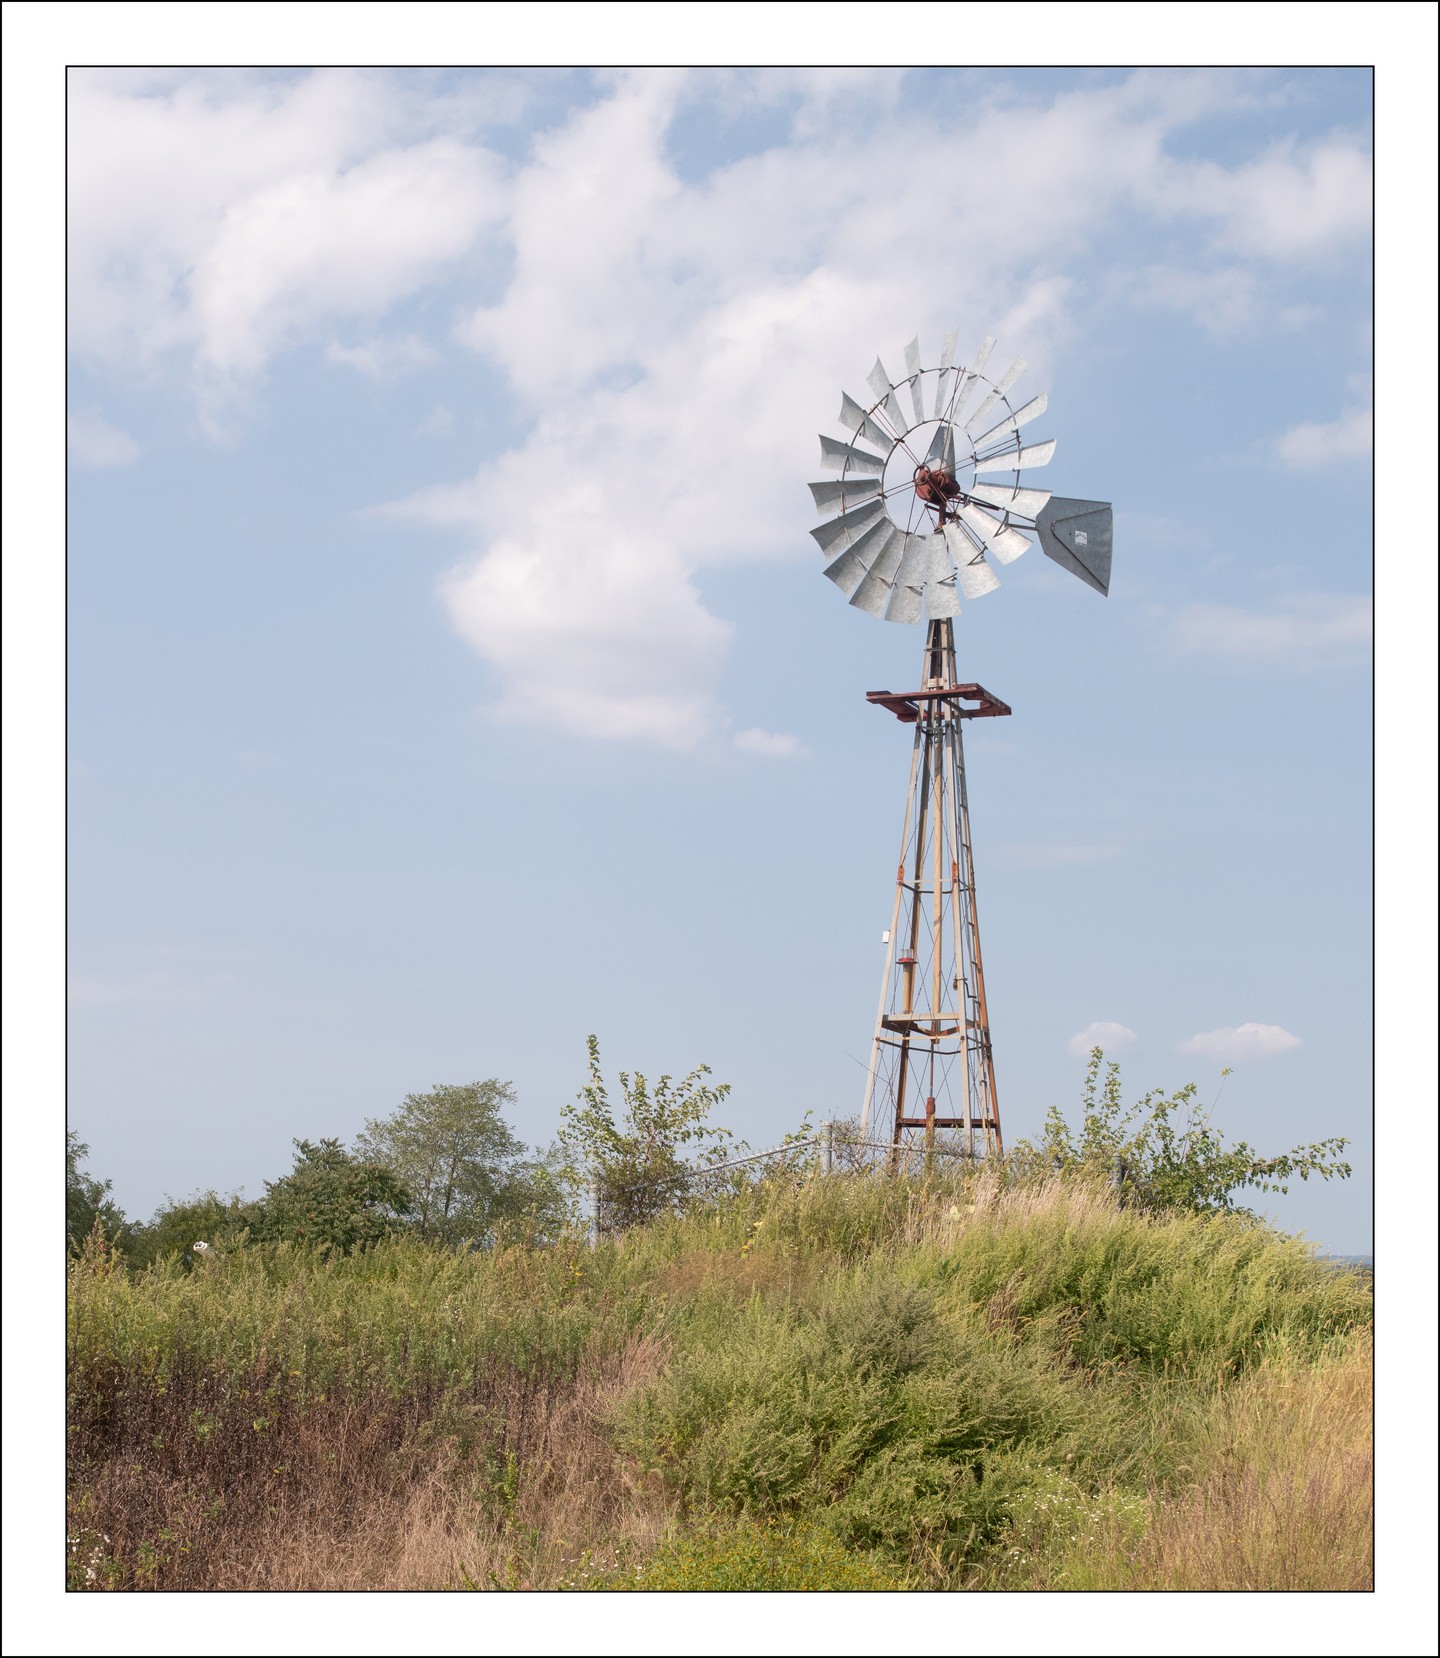 Shot this #windmill in NormanJLevyParkAndPreserve with Sean a couple of weeks ago.

#landscape
#wind
#mill
#art
#photography
#nature
#nikon
#d5600
#nikond5600